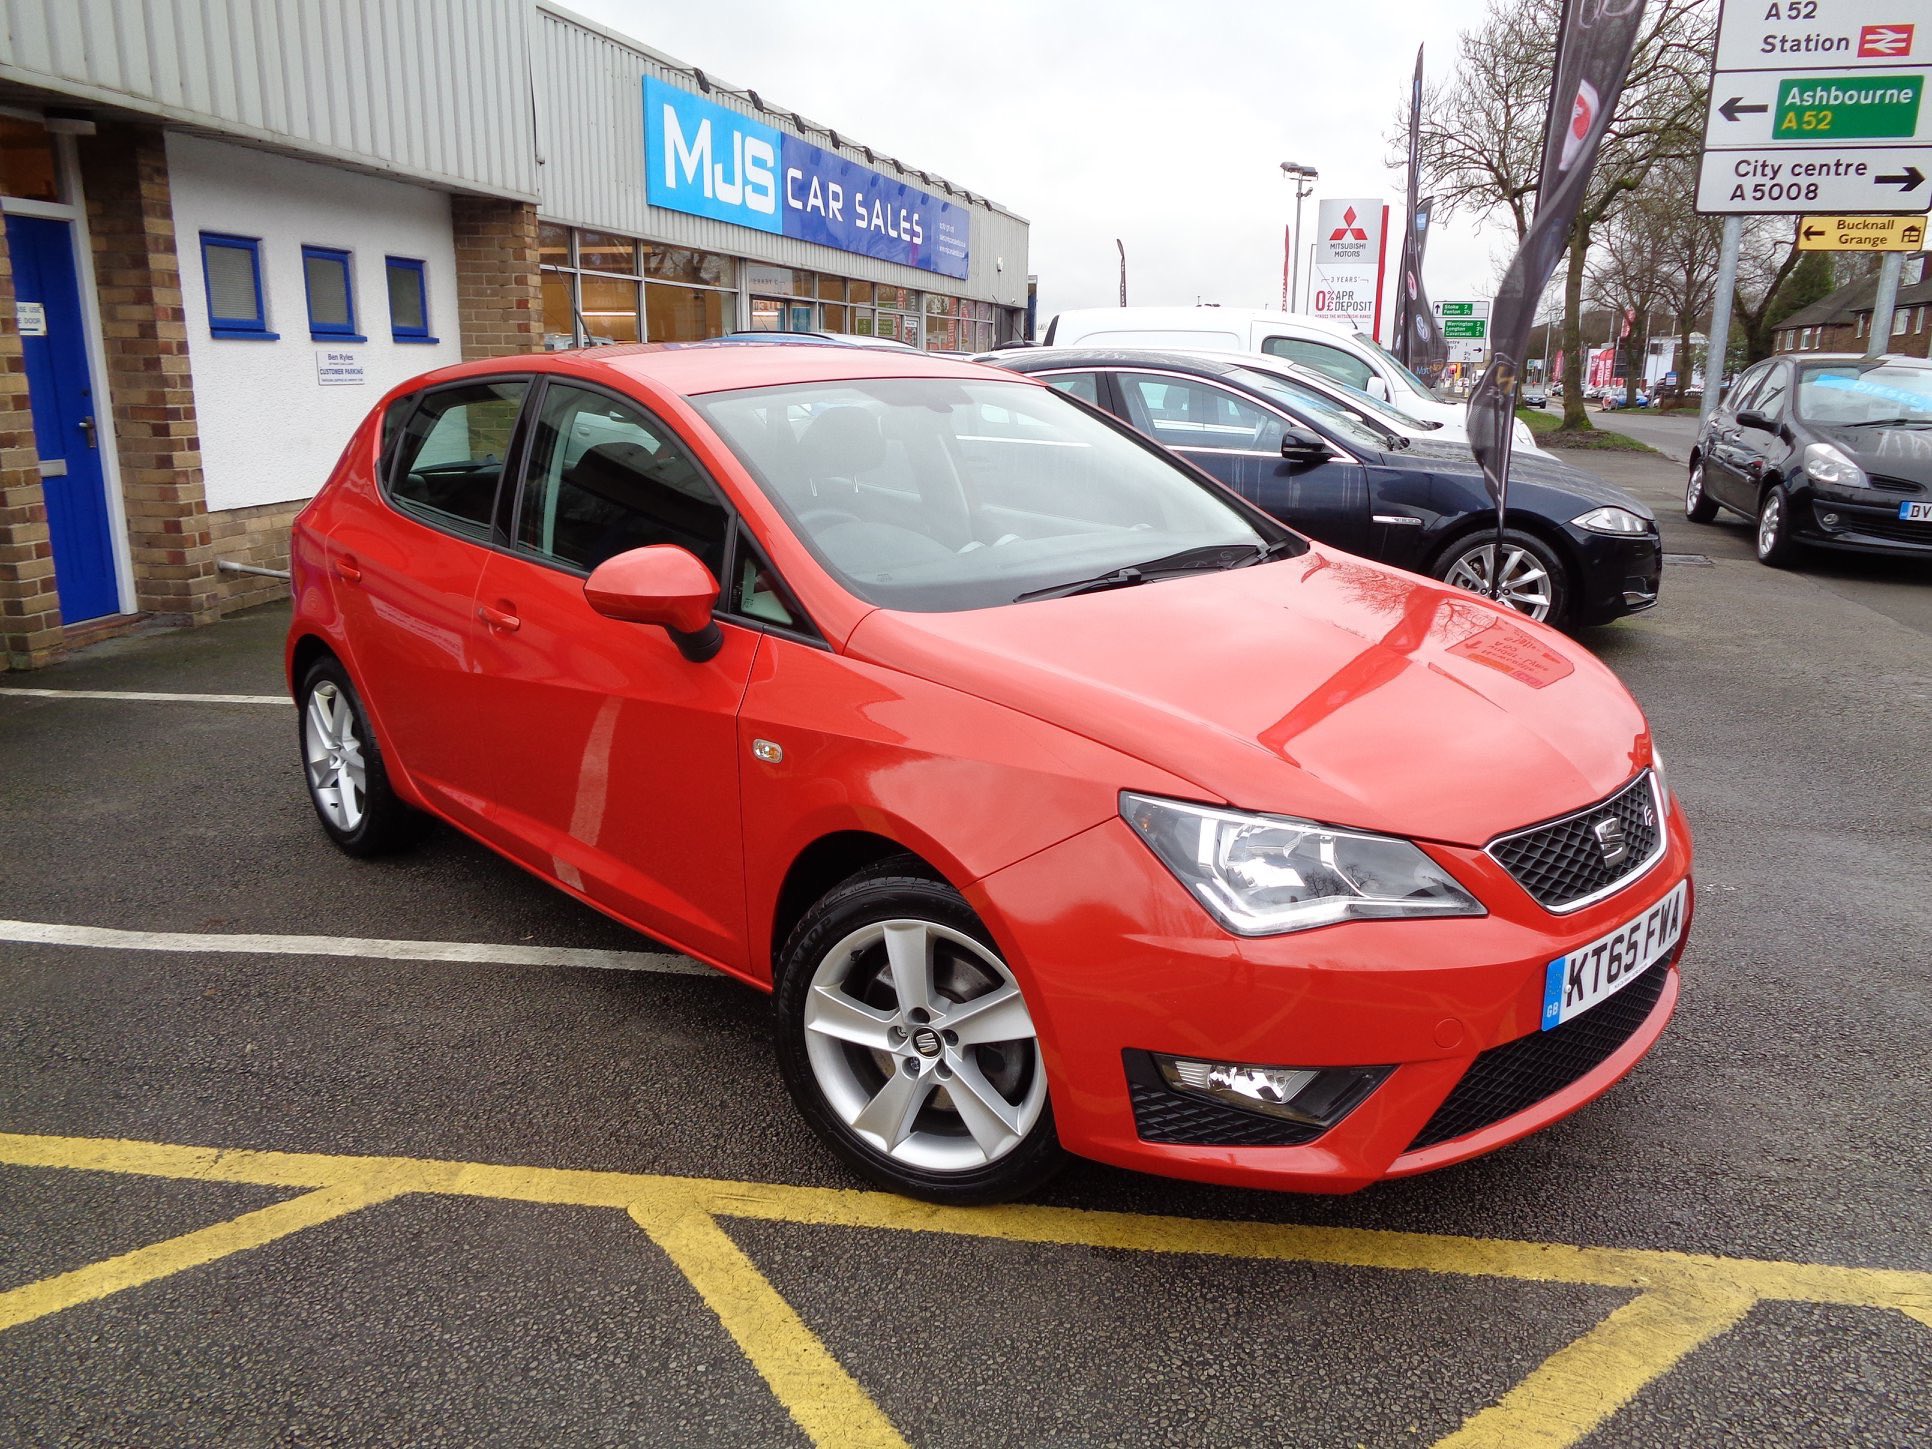 discolor familie følgeslutning MJS Car Sales on Twitter: "We're filling up thick &amp; fast &amp; this  stunning Chilli Red Seat Ibiza FR is just one of many cars going on sale  today 😍 #seat #emocion #